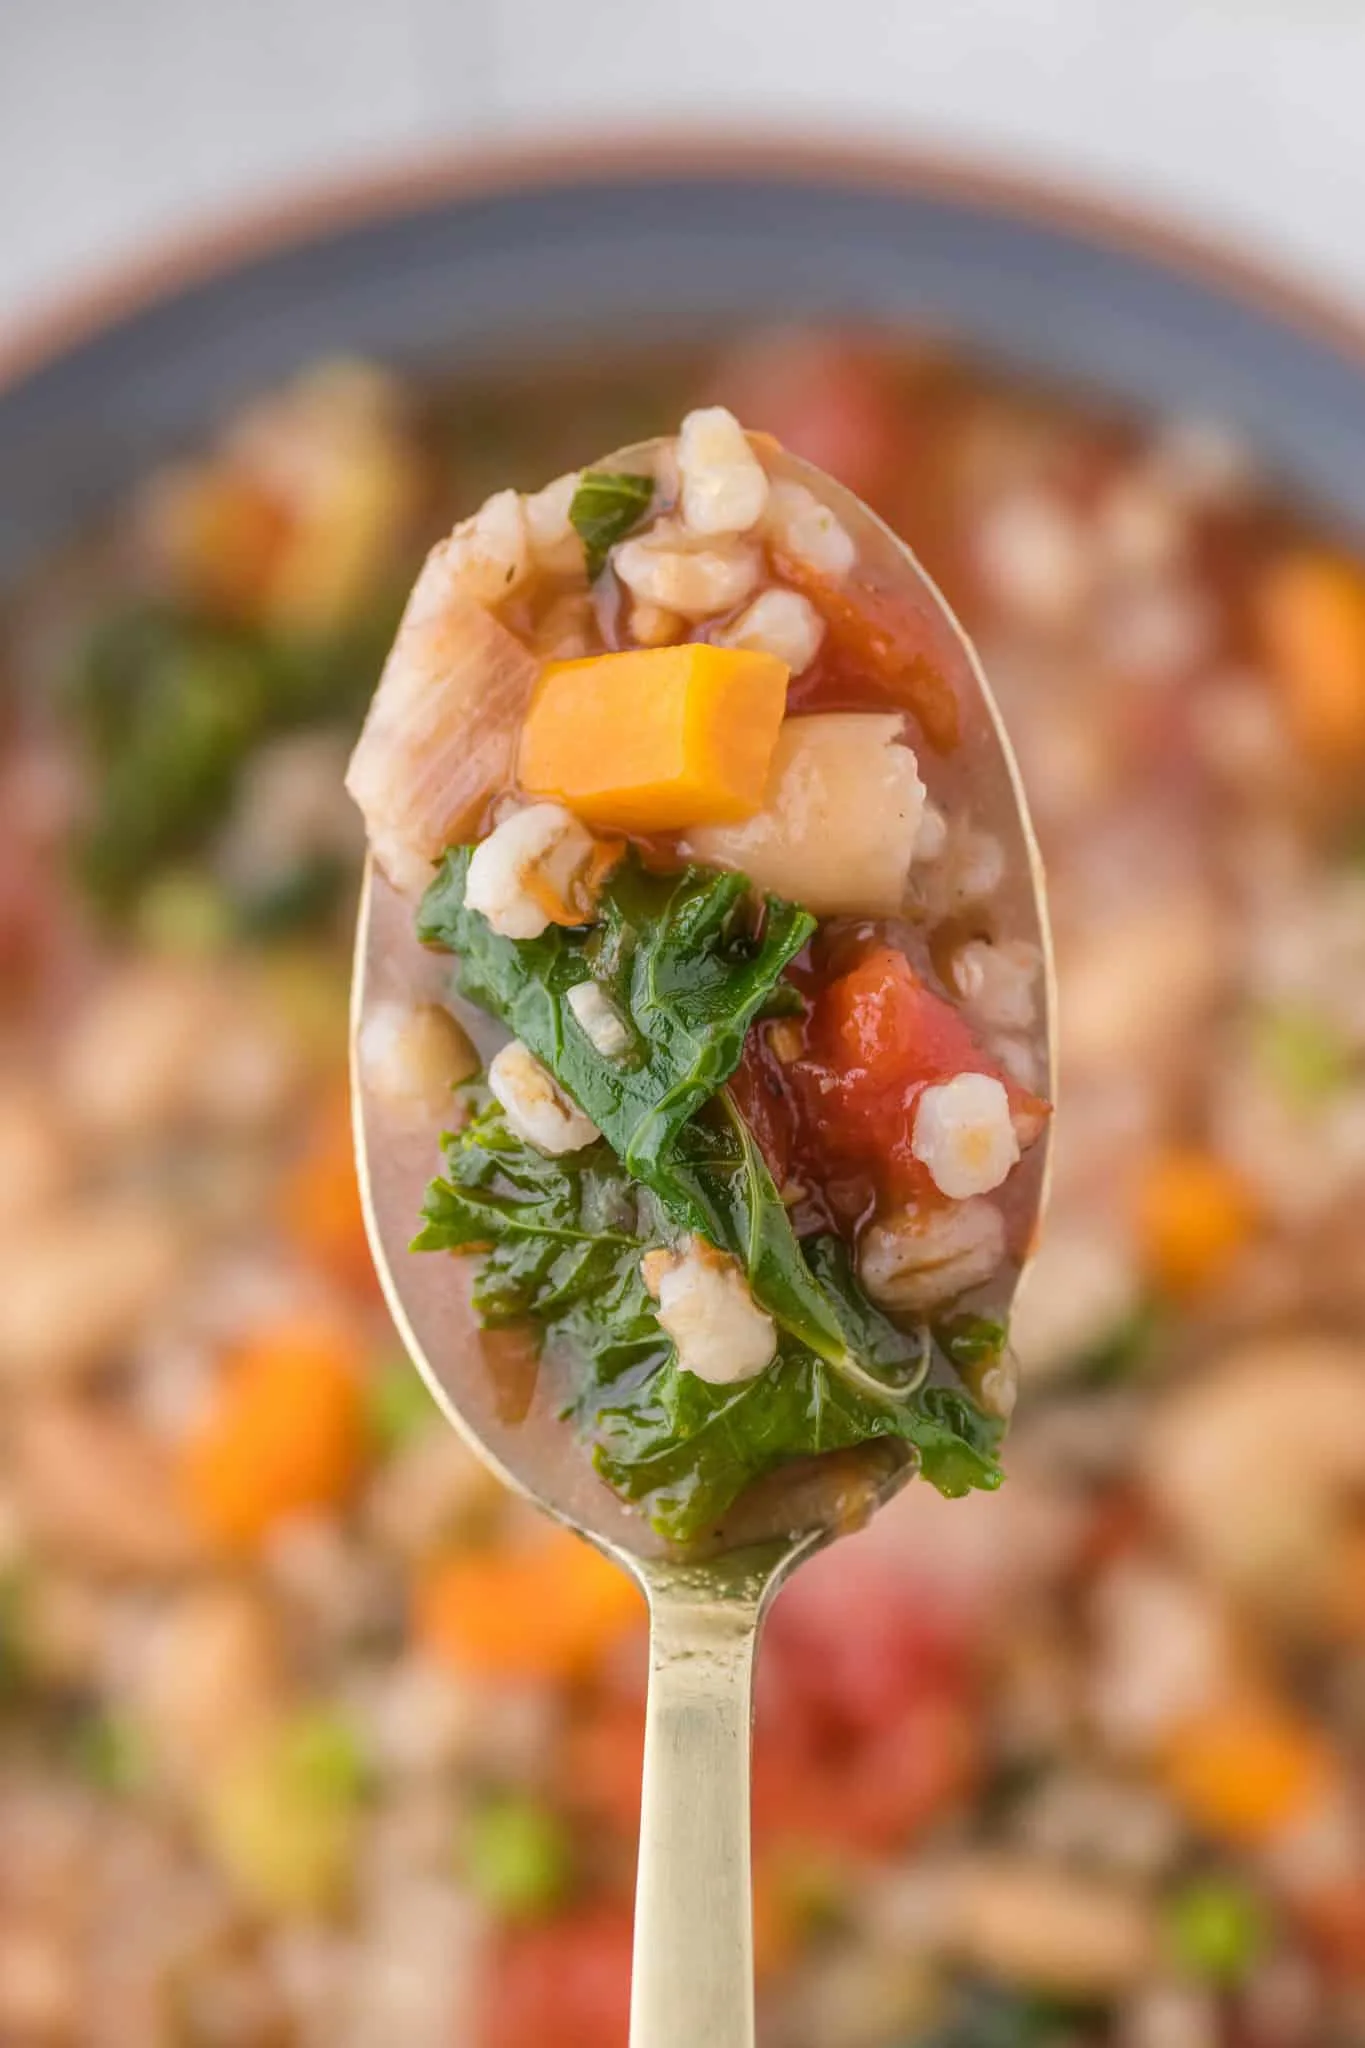 Vegetable Barley Soup is a hearty soup loaded with beans, diced tomatoes, peas, carrots, kale and pearled barley.